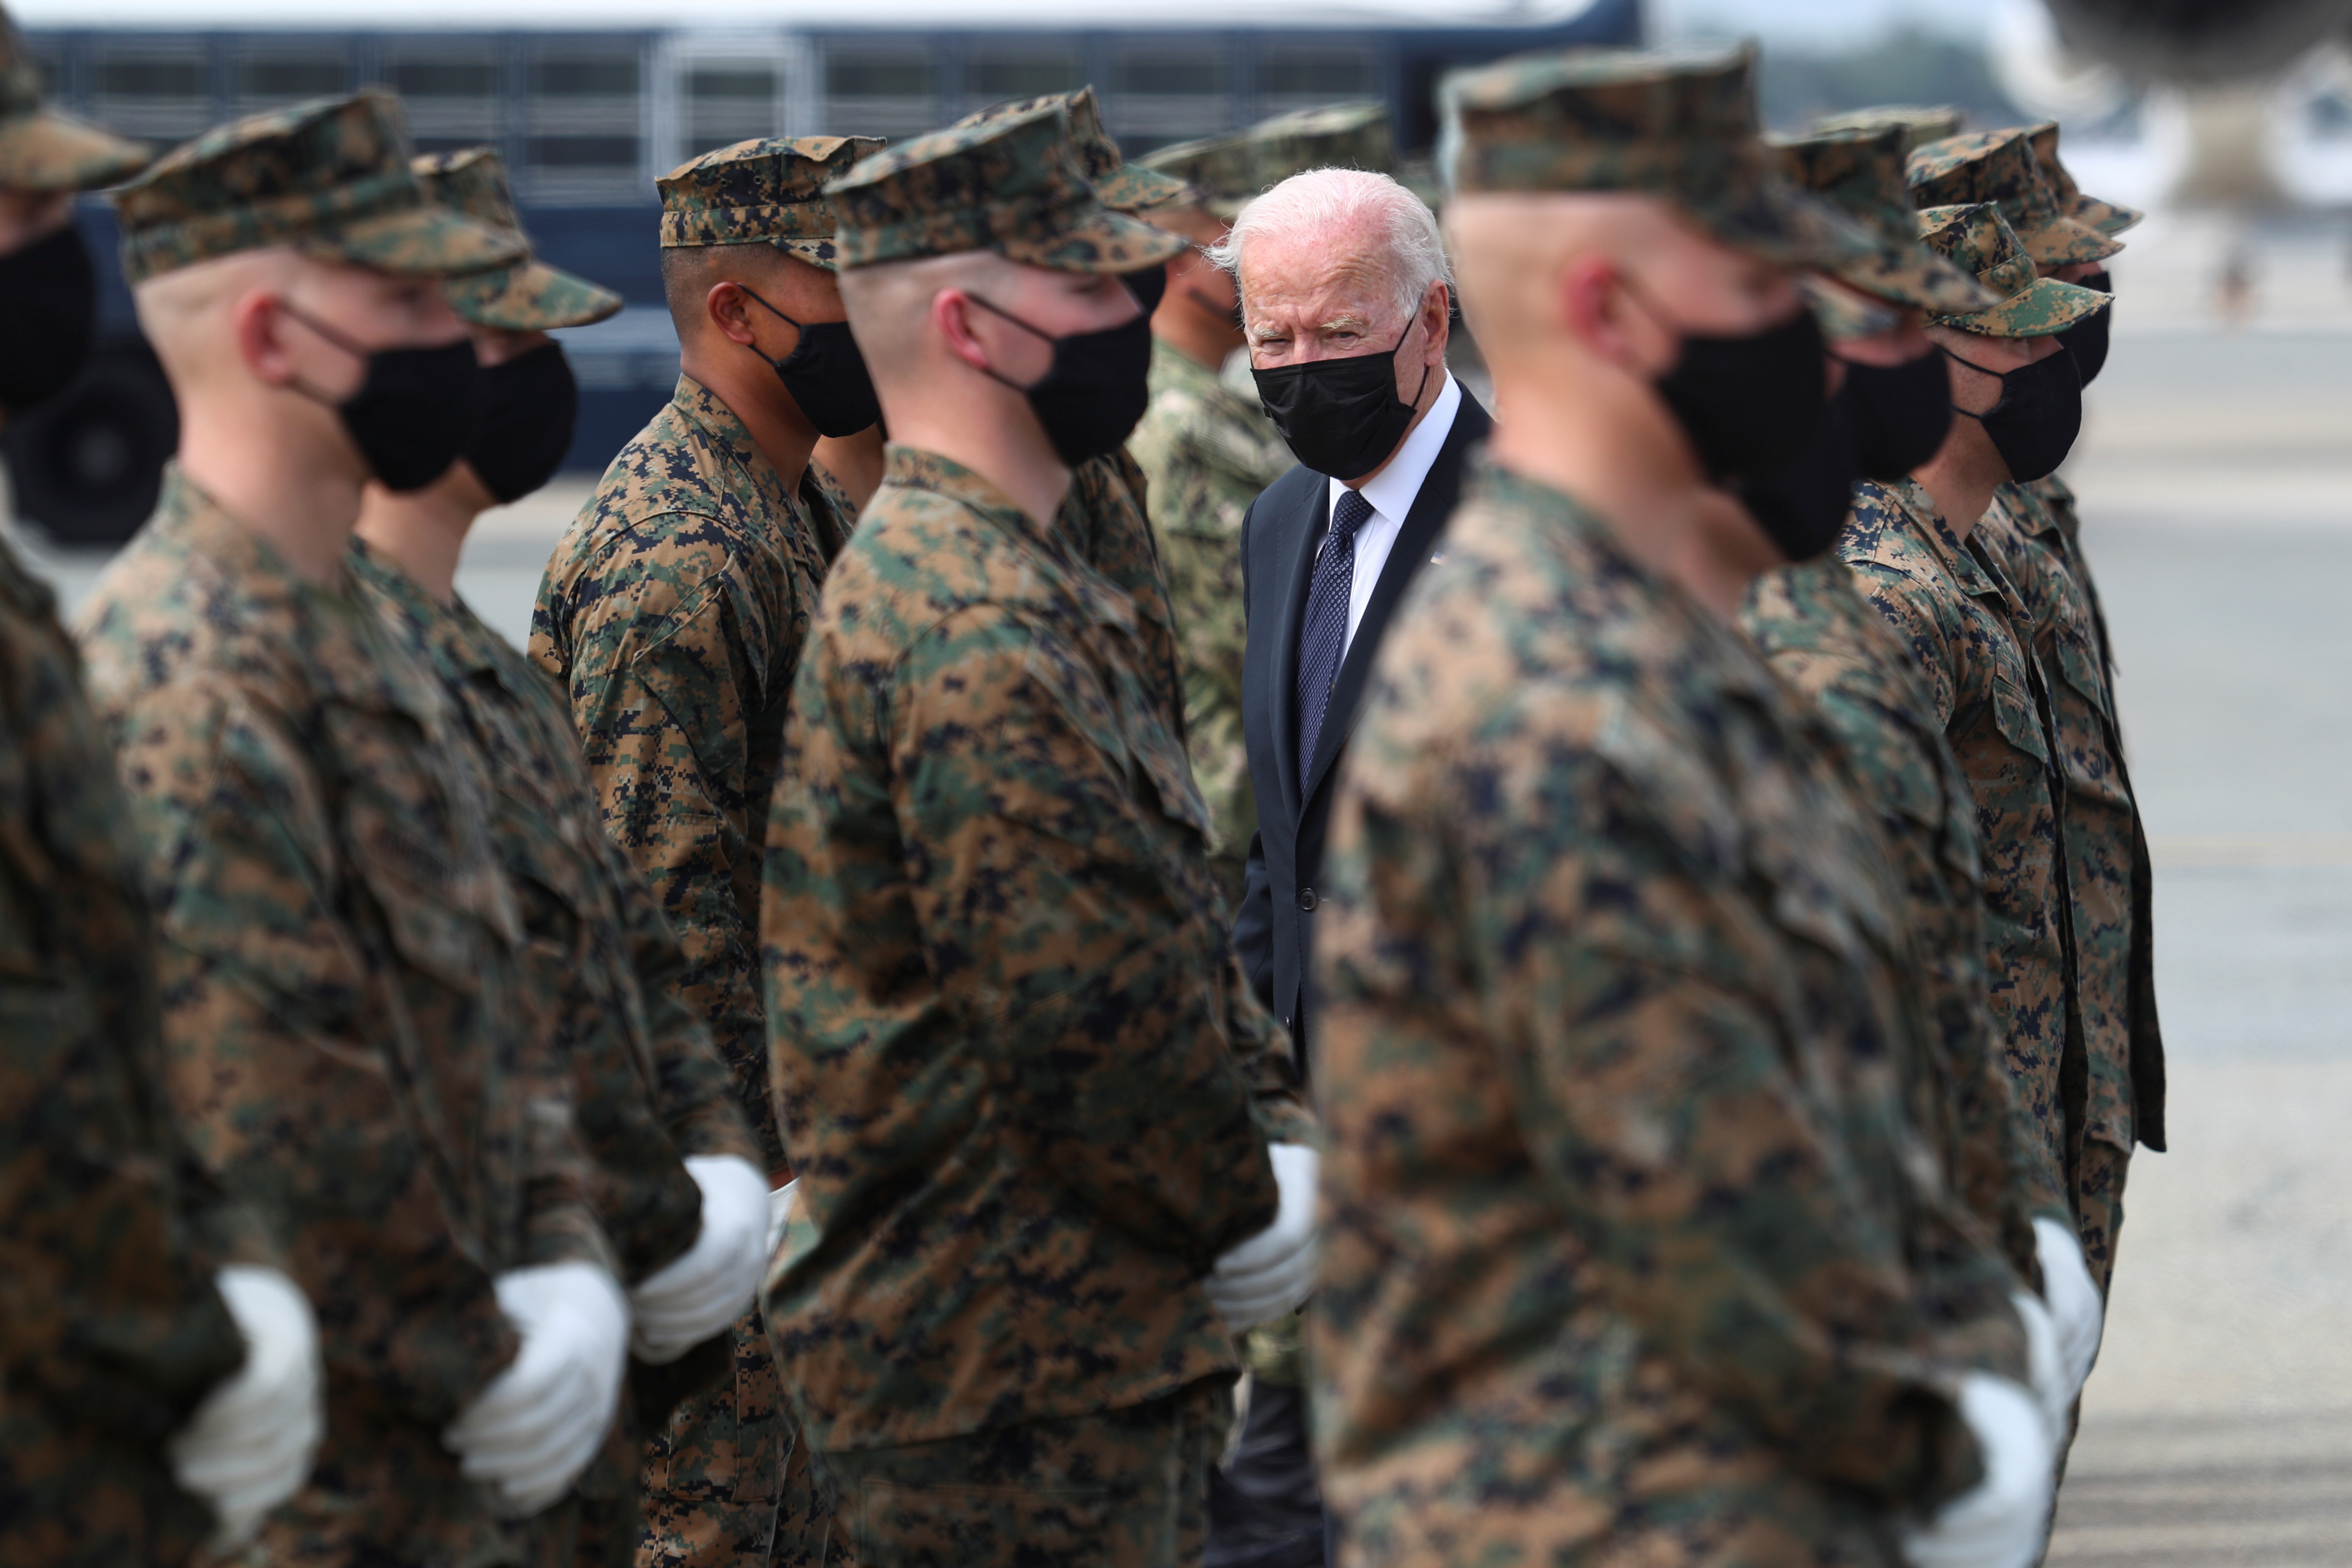 U.S. President Joe Biden hands challenge coins to the members of the U.S. Marine Corps Honor Guard before boarding Air Force One